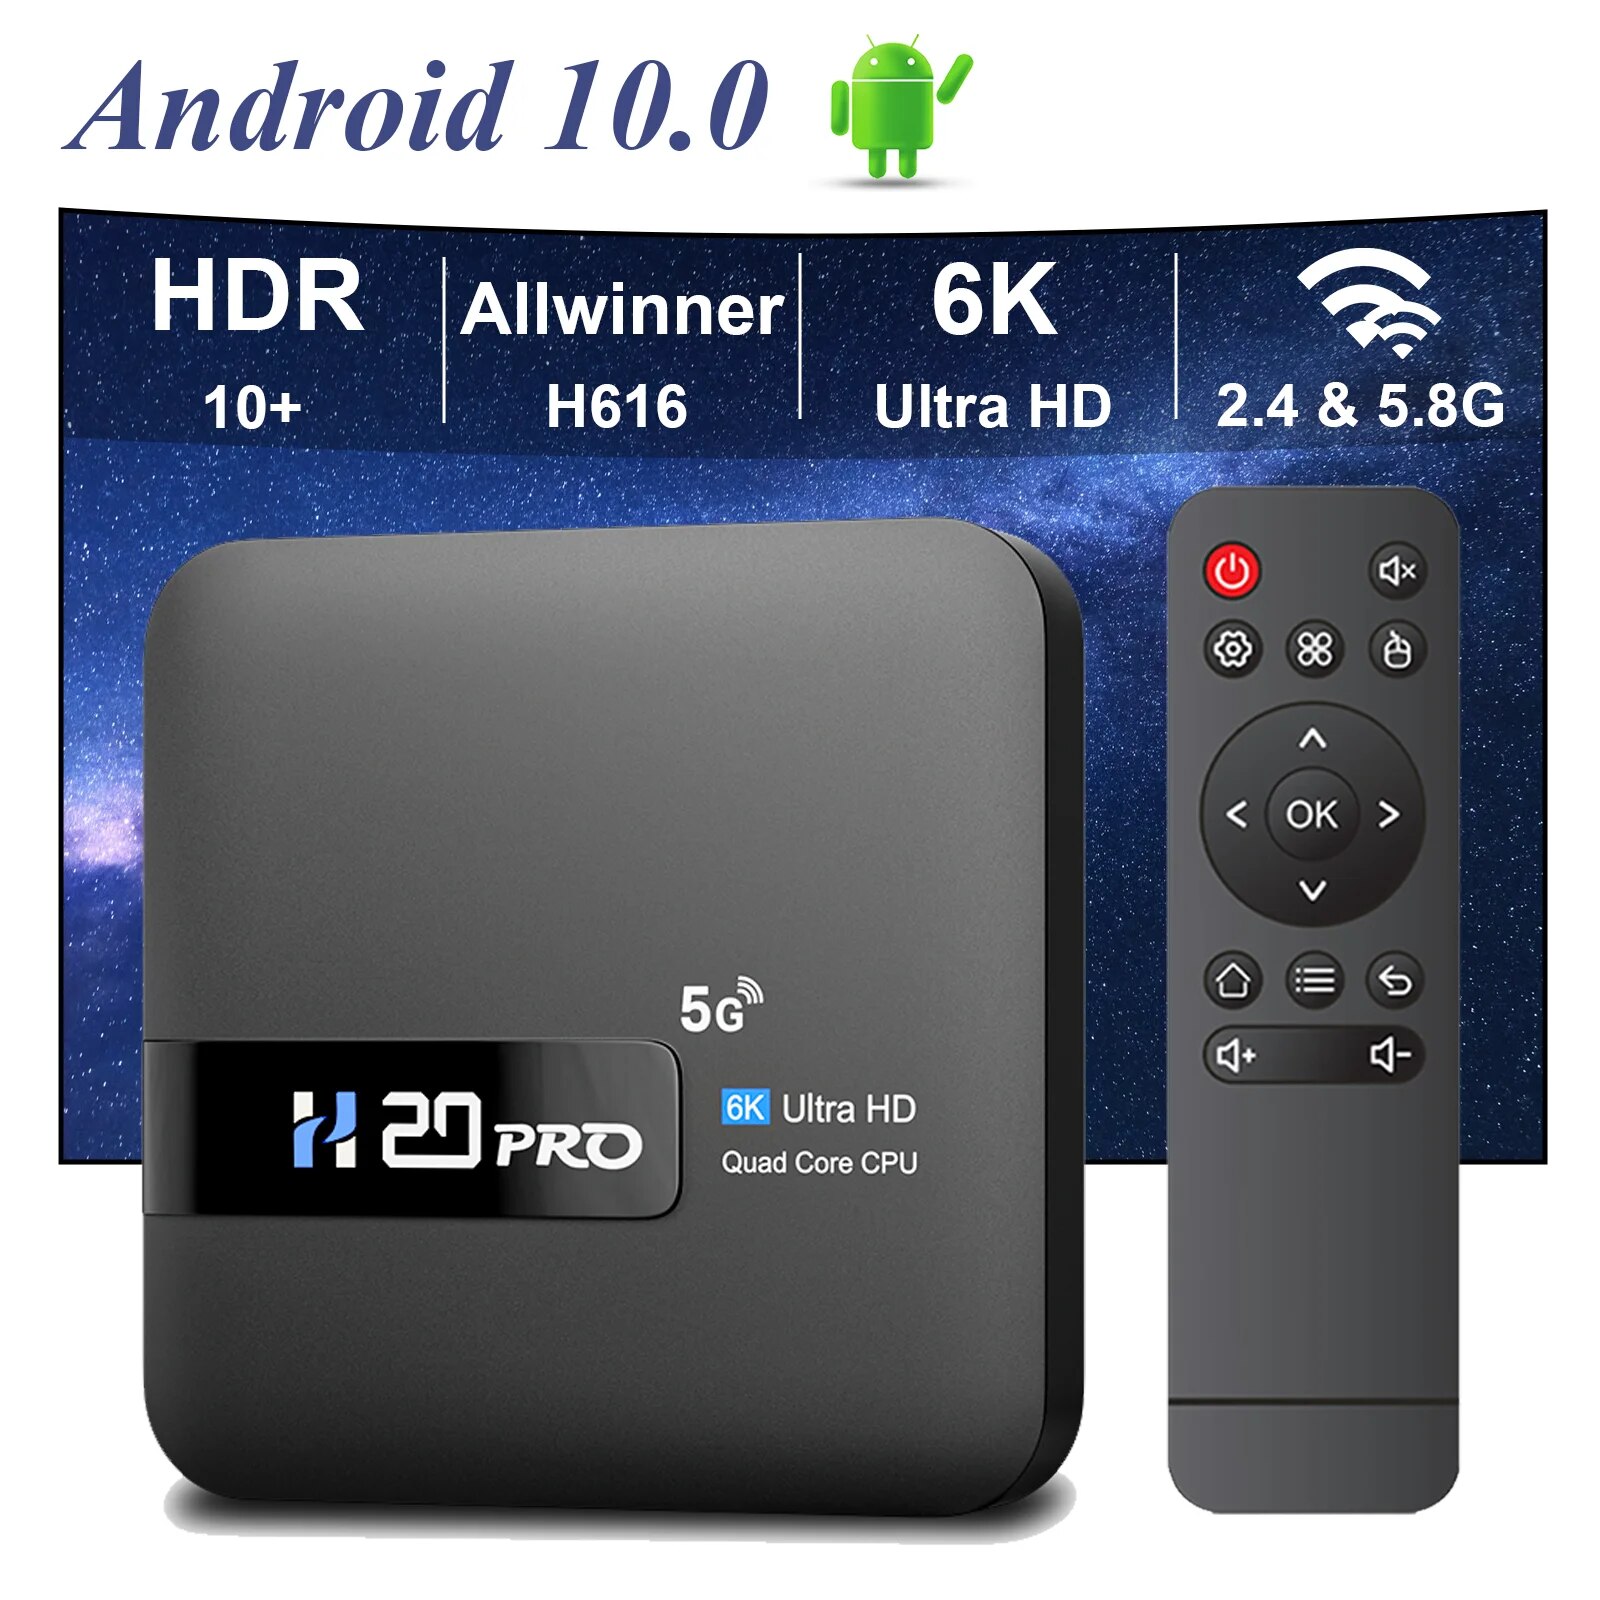 H20PRO Smart Android TV Box Android 10.0 Review